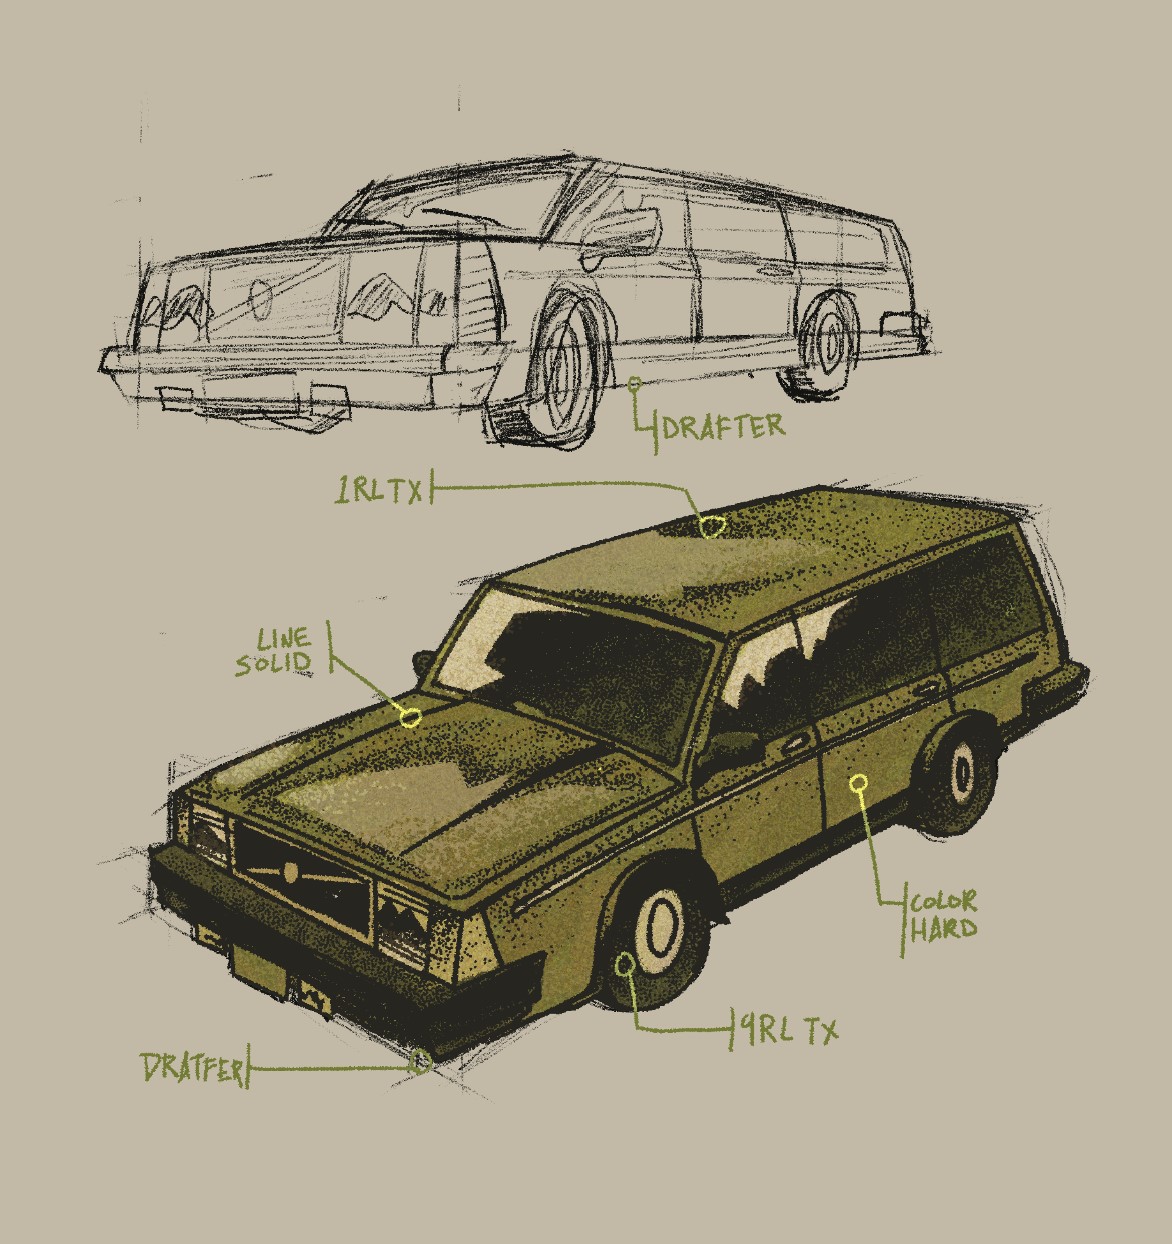 Two sketches of a station wagon at two different angles, one colored. The sketches are labeled detailing the various brushes used to render the piece, including the Color Hard for the color, Line Solid for most of the linework, Drafter for the more pencil-like lines, and 1LR TX and 9RL TX for the stippled areas.